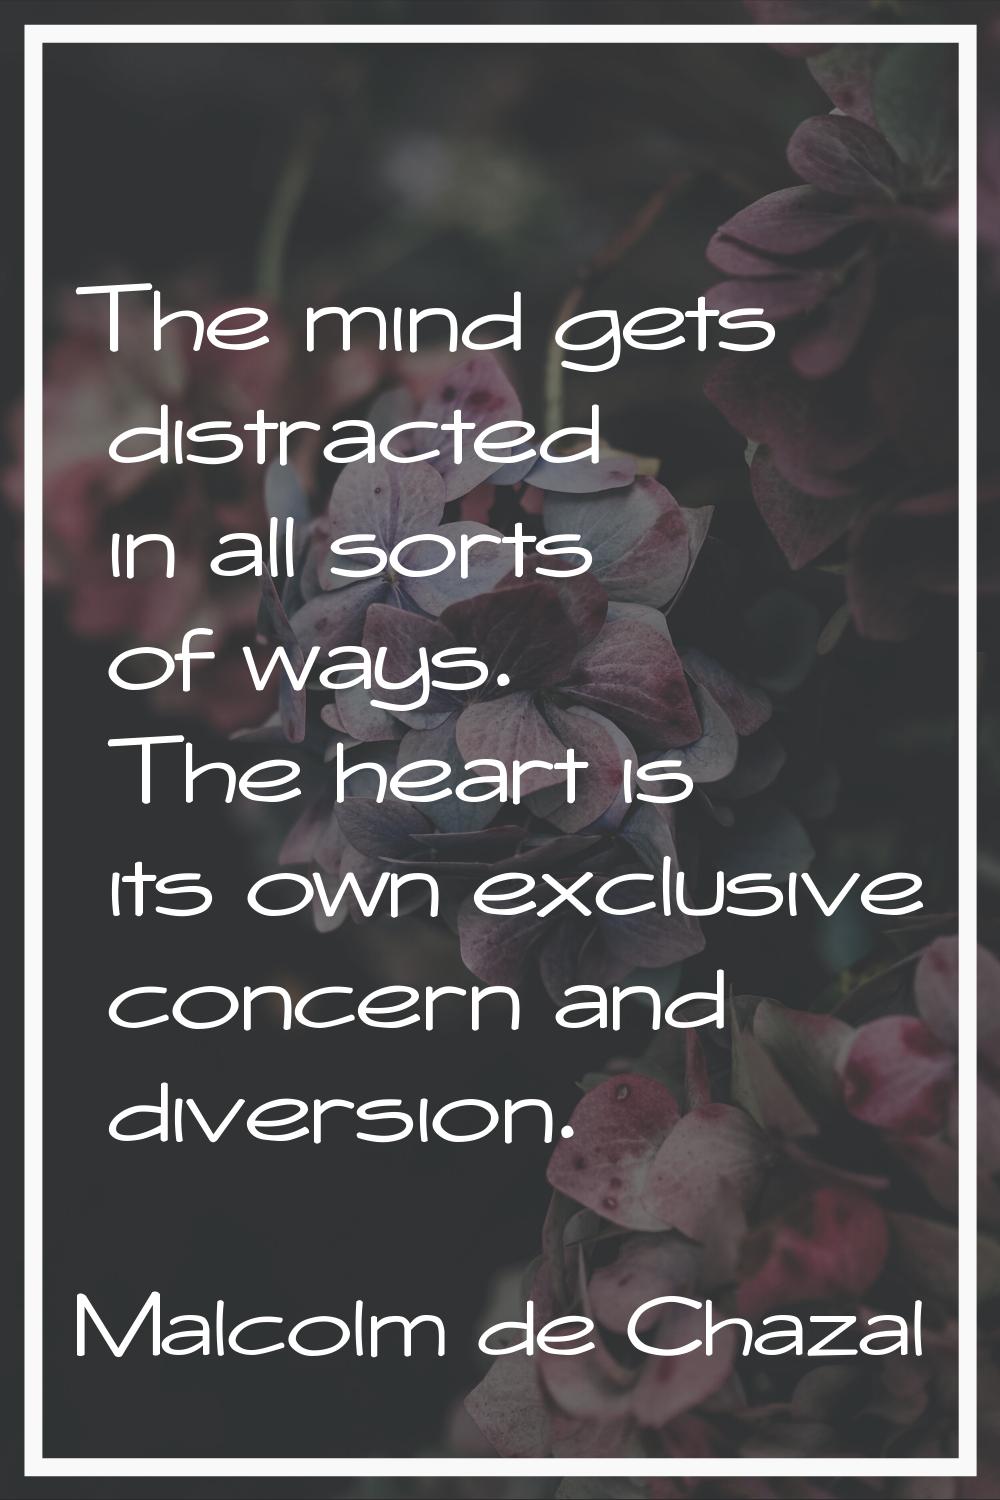 The mind gets distracted in all sorts of ways. The heart is its own exclusive concern and diversion